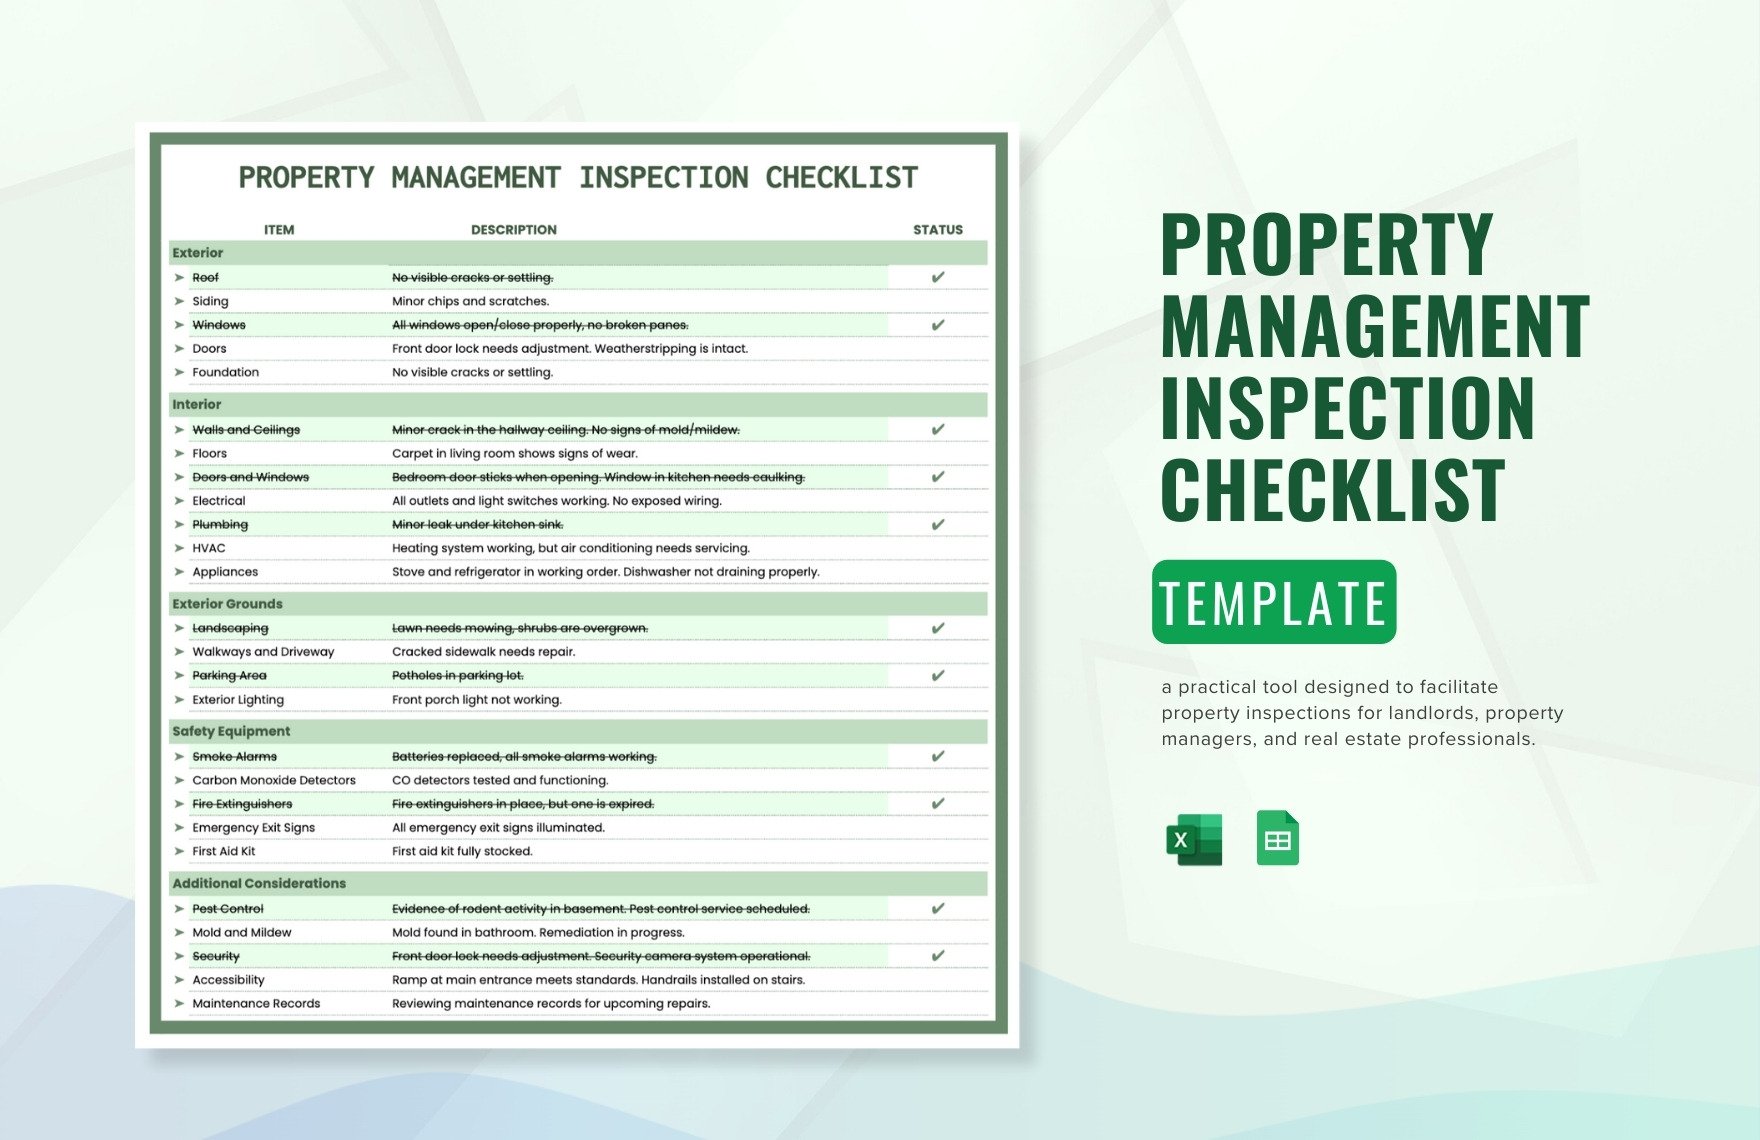 Property Management Inspection Checklist Template in Excel, Google Sheets